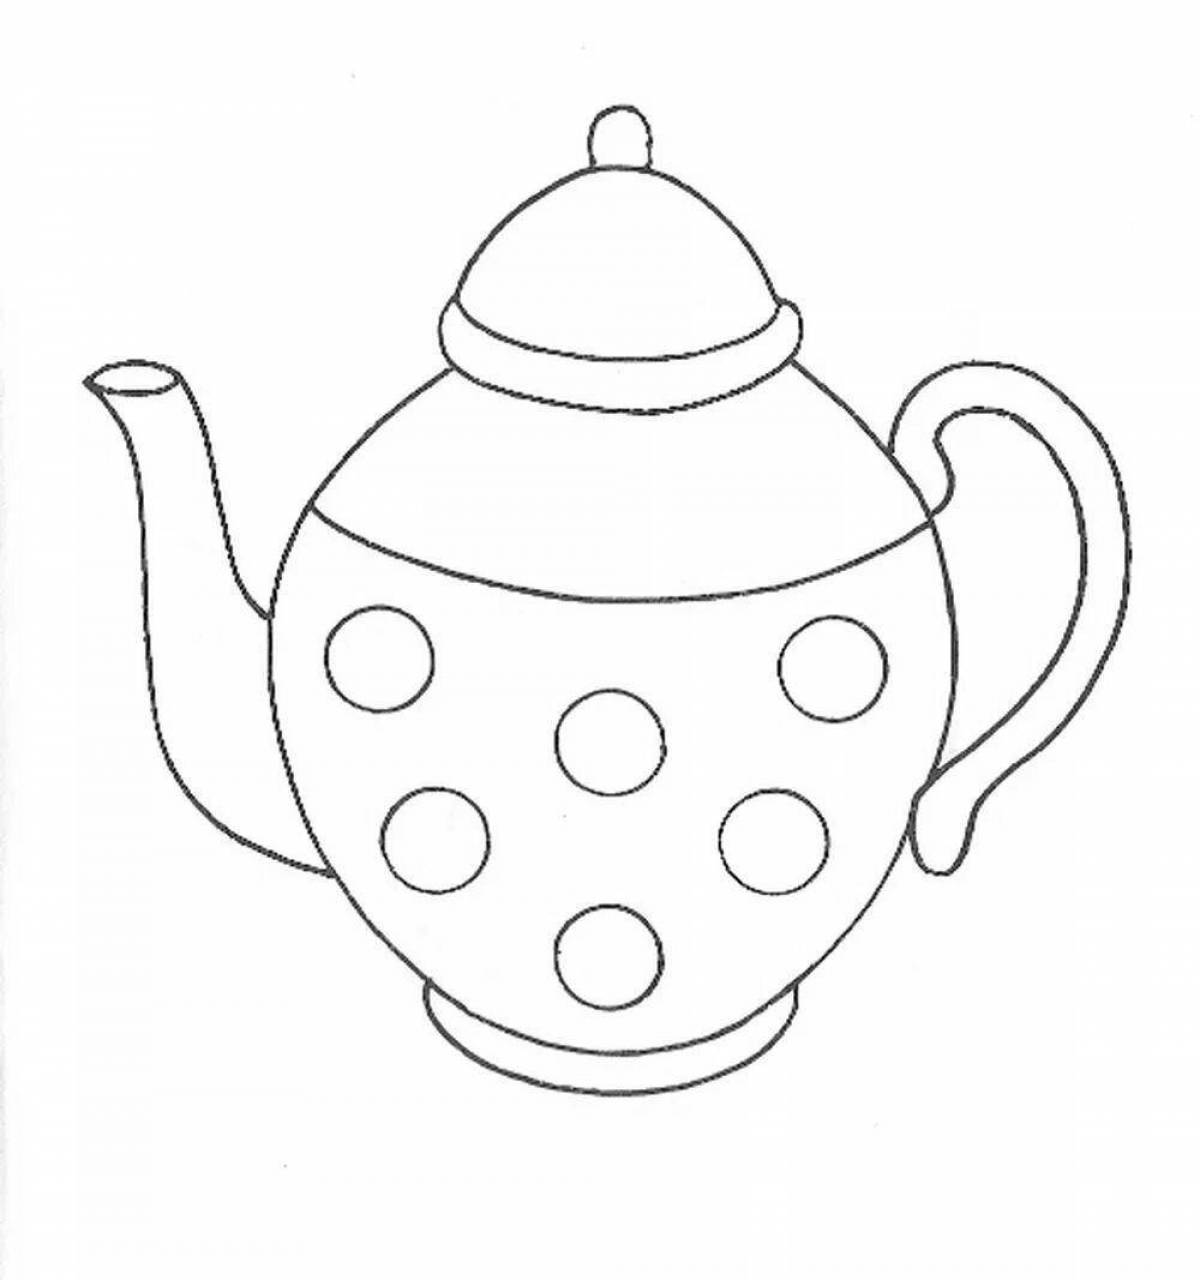 Coloring page of tea utensils for kids